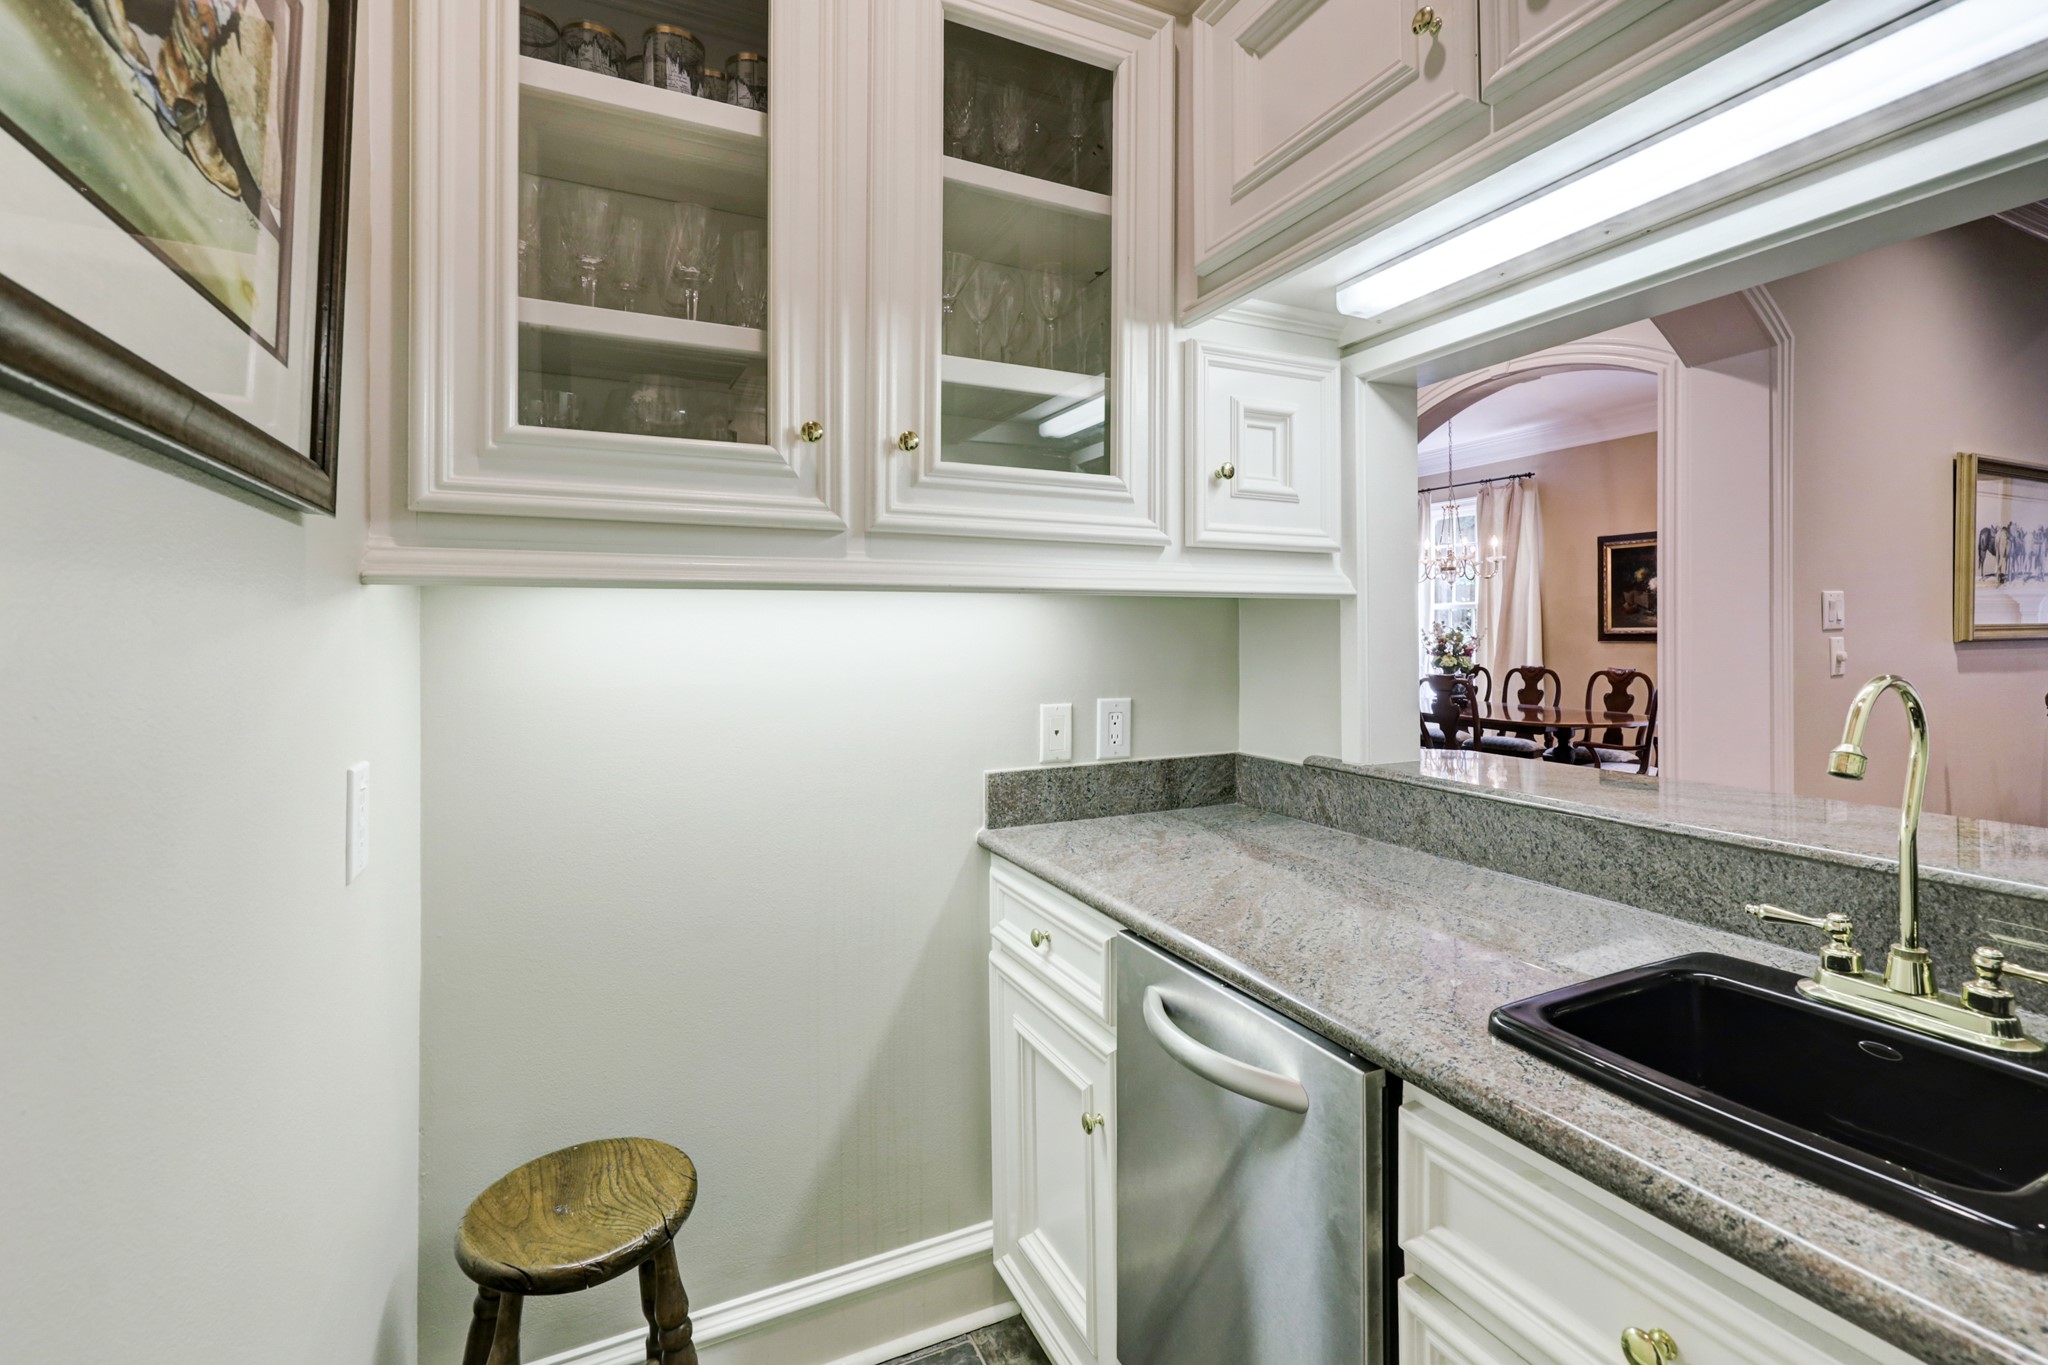 A fabulous wet bar is thoughtfully located off of the Kitchen and steps away from the Family Room. This space features a KitchenAid ice maker, bar sink with brass finishes, glass front display cabinets and extra storage for all of your bar items.
